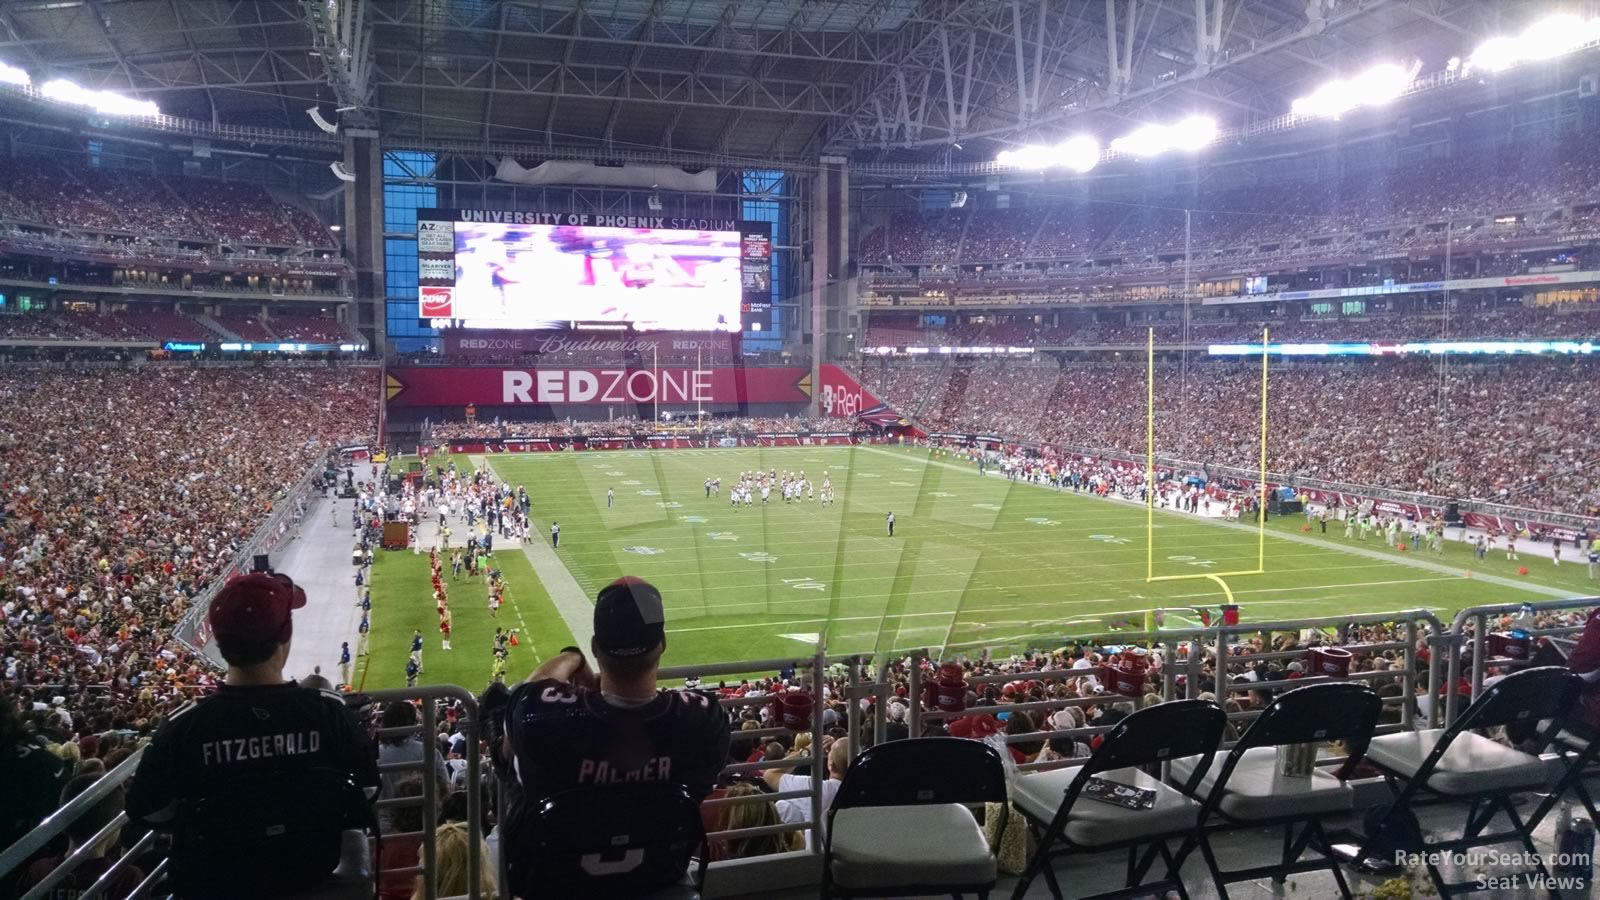 View from the Handicap seating area in Section 122